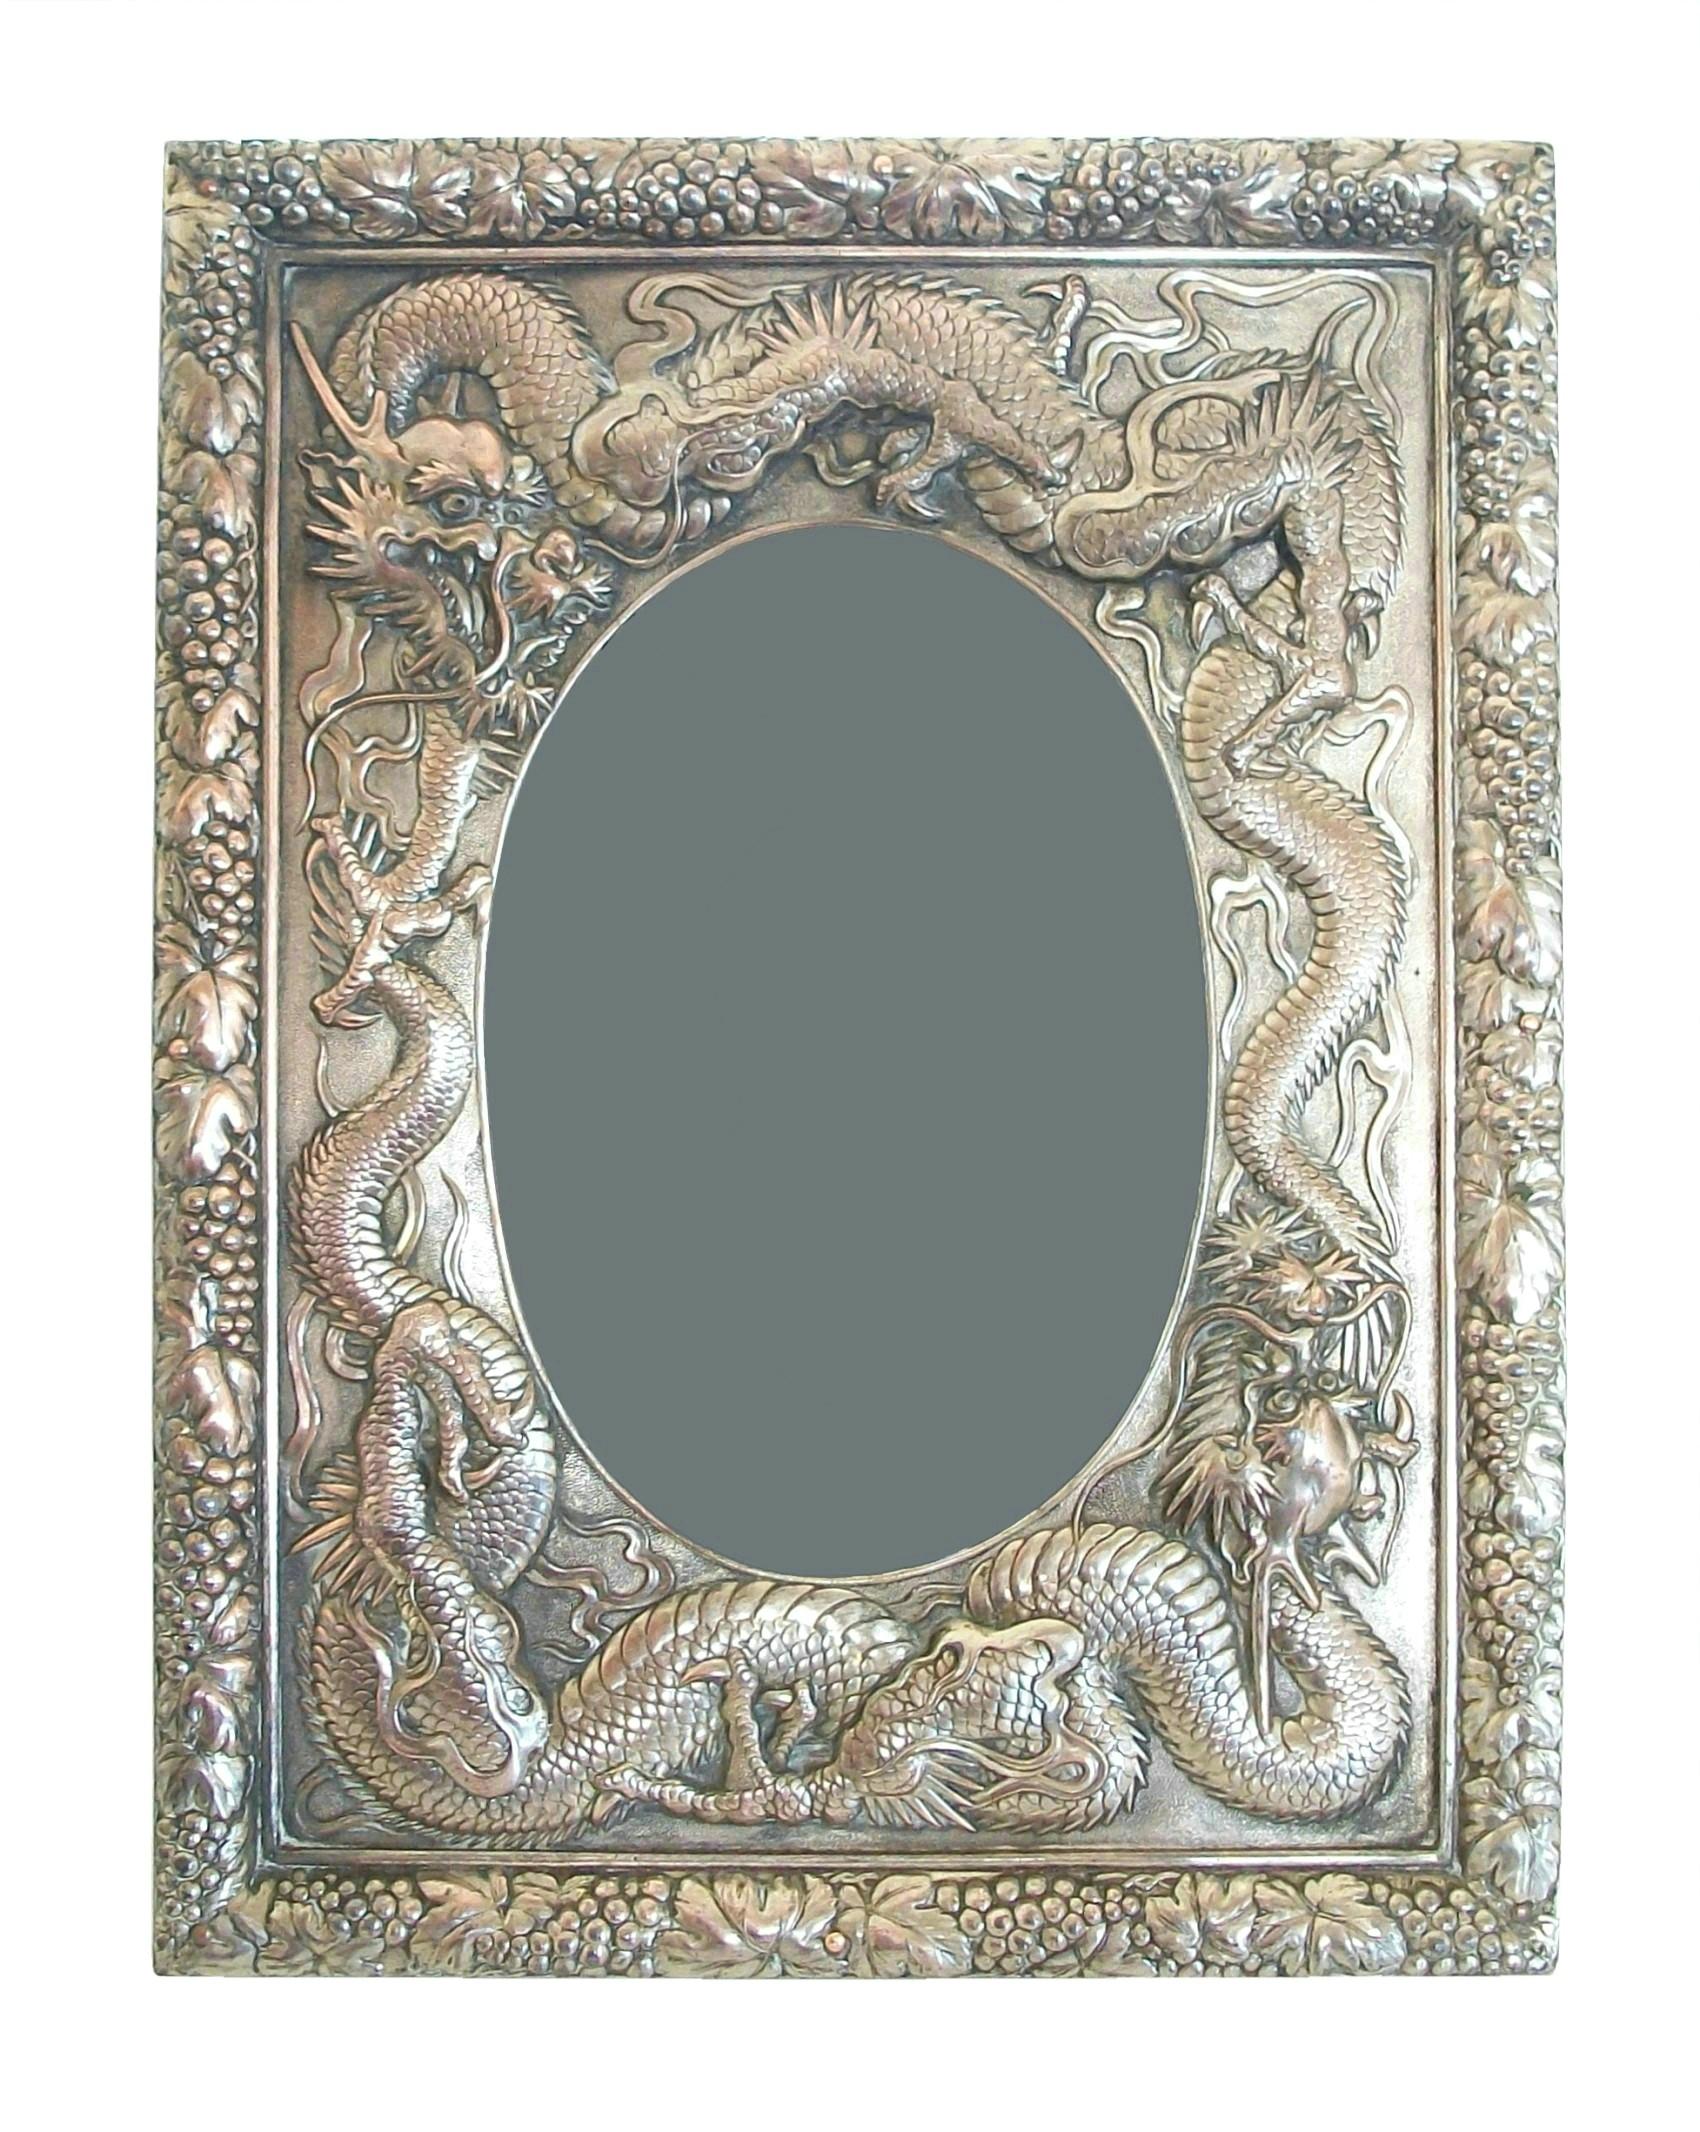 Antique Chinese export silver repoussé photo frame - silver content unknown - large size - oval opening - featuring dragons with fine detail in high relief surrounded by a border of leaves and grapes - warm aged patina over-all - free standing easel